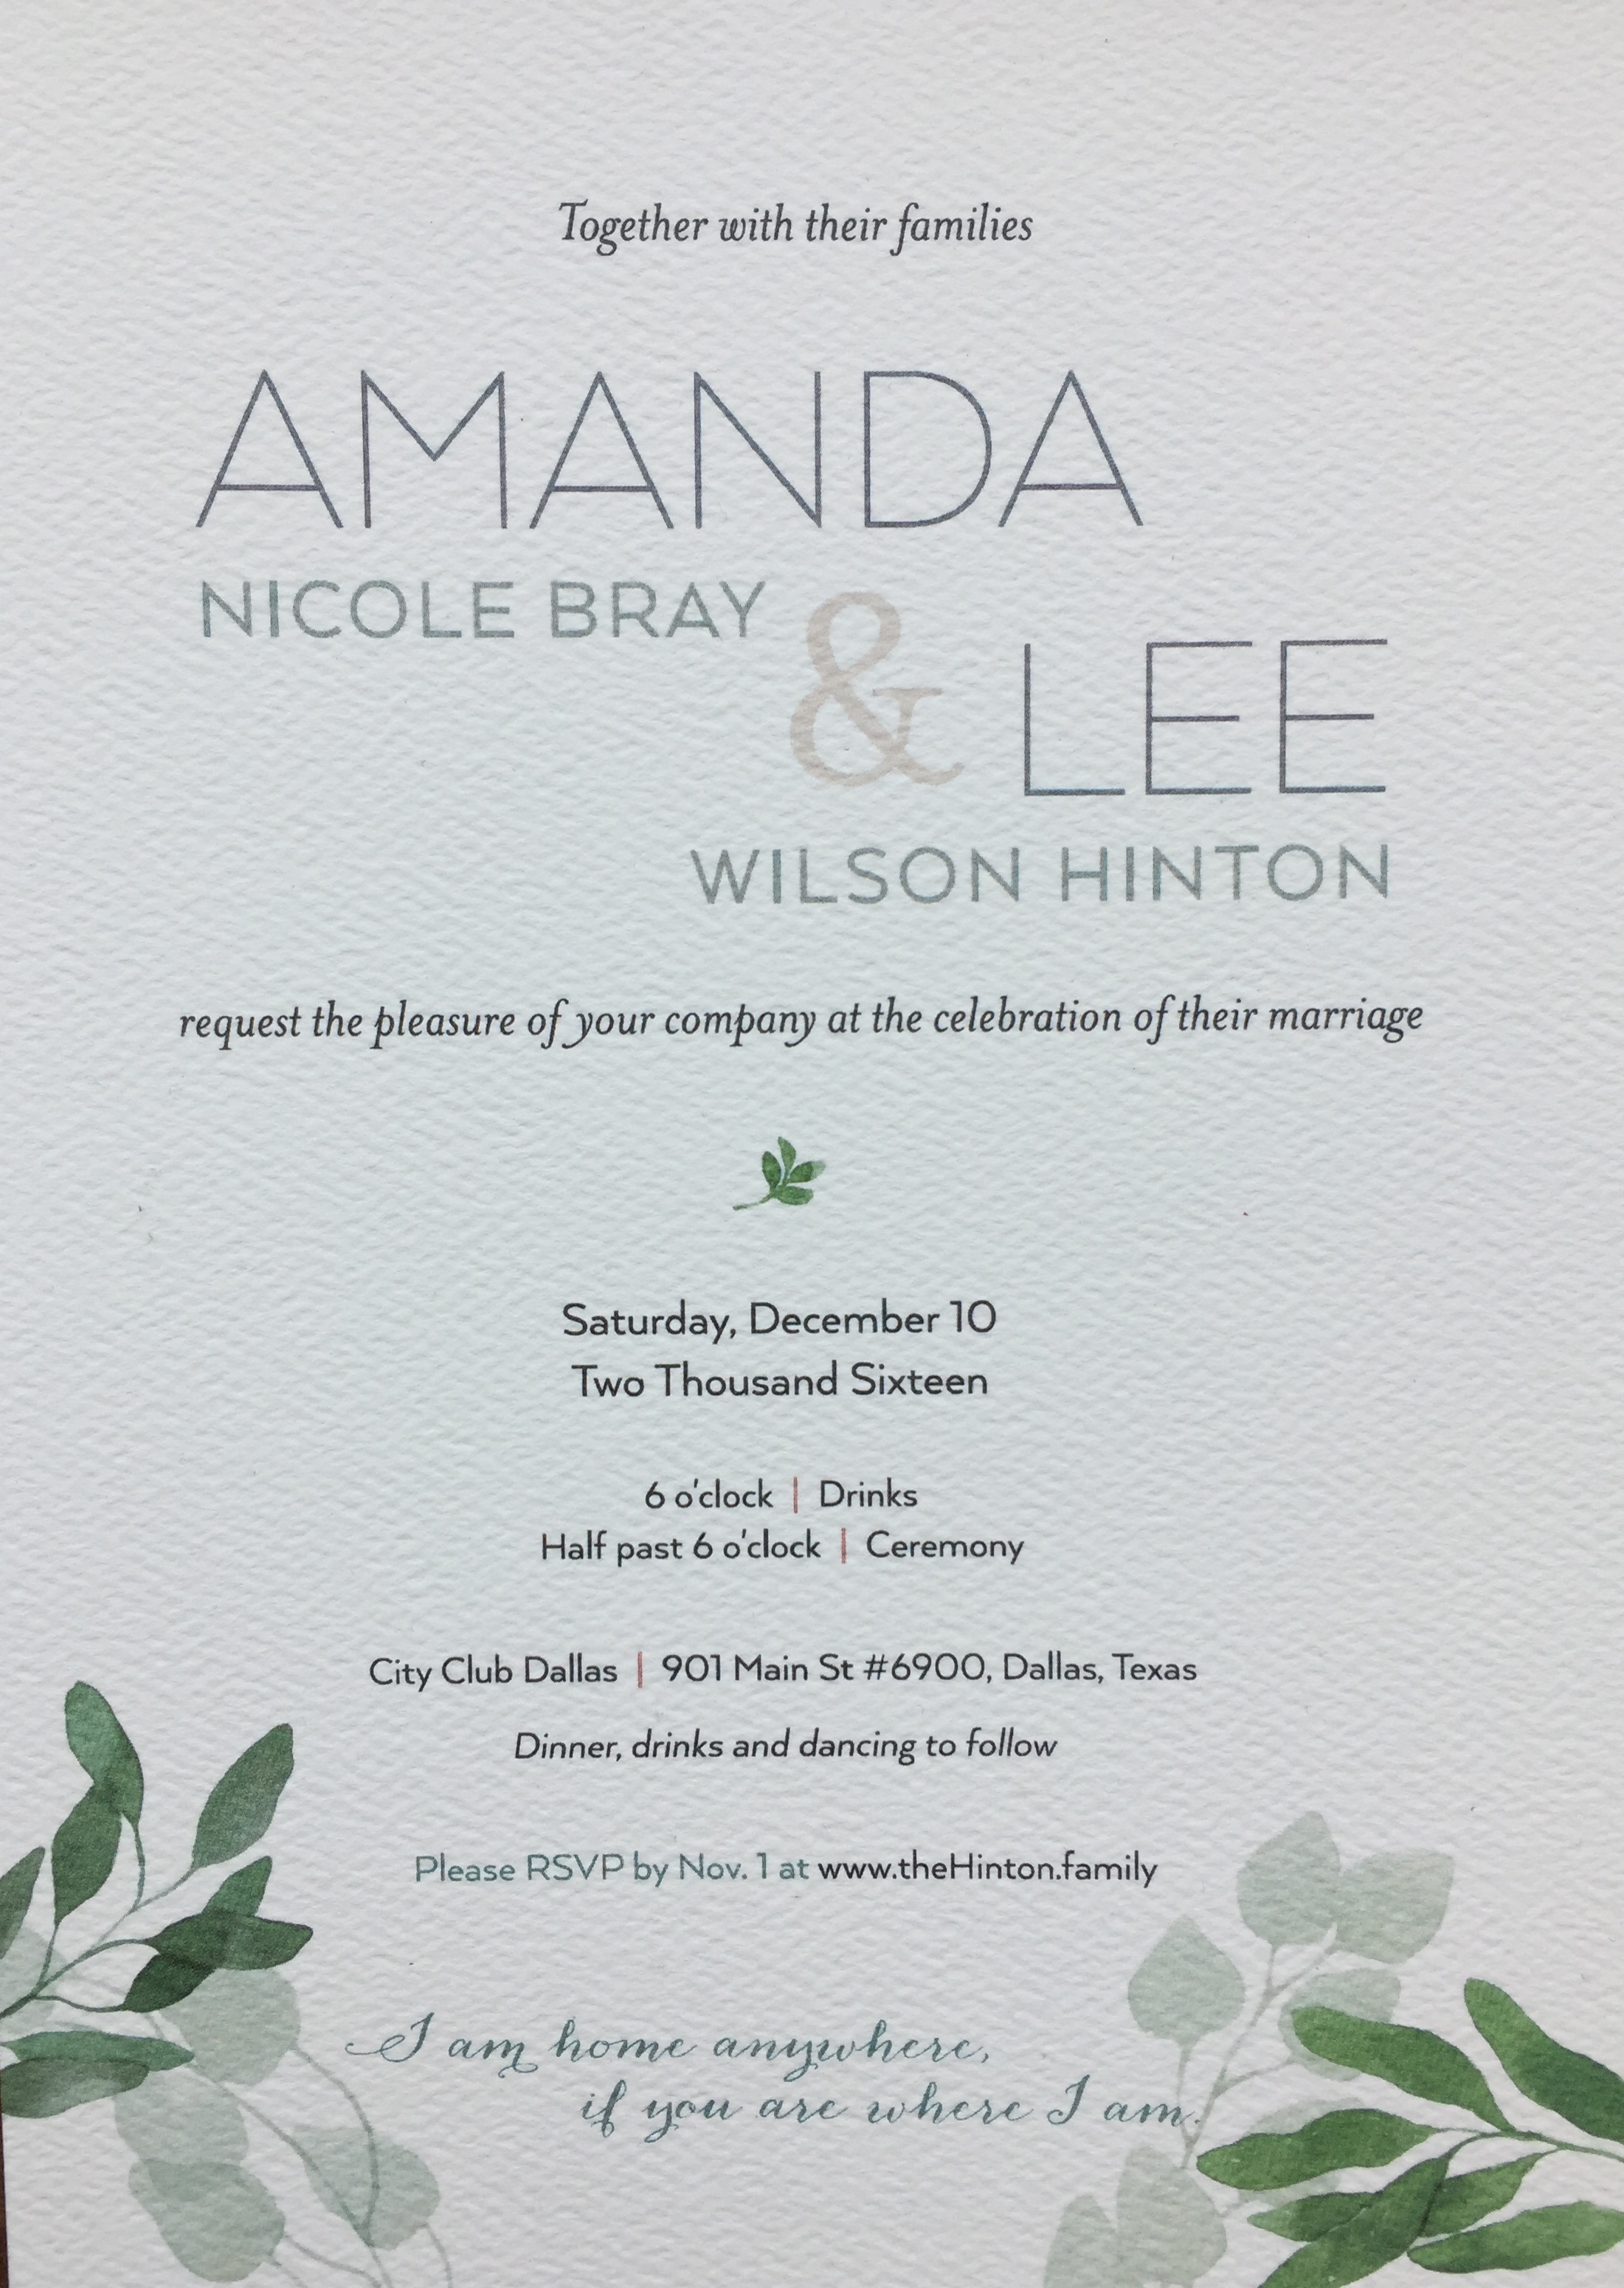  The invitation was simple, one-sided and didn't require extra shipping fees. 